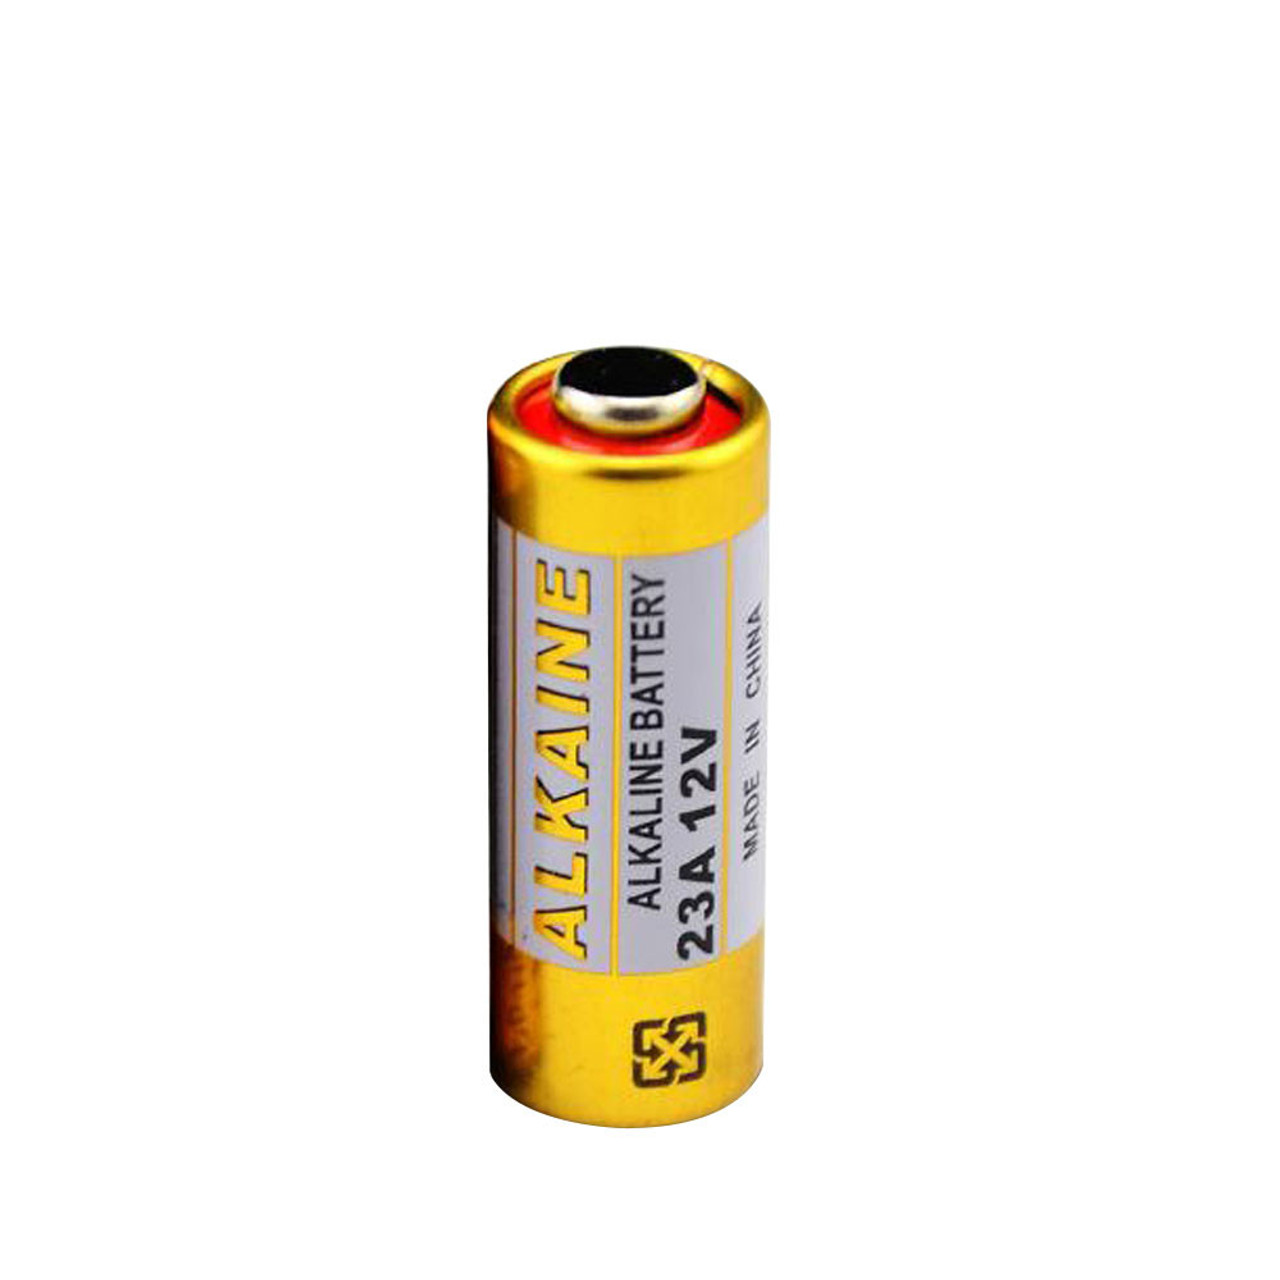 12A battery for use in our Attendent Call Buttons